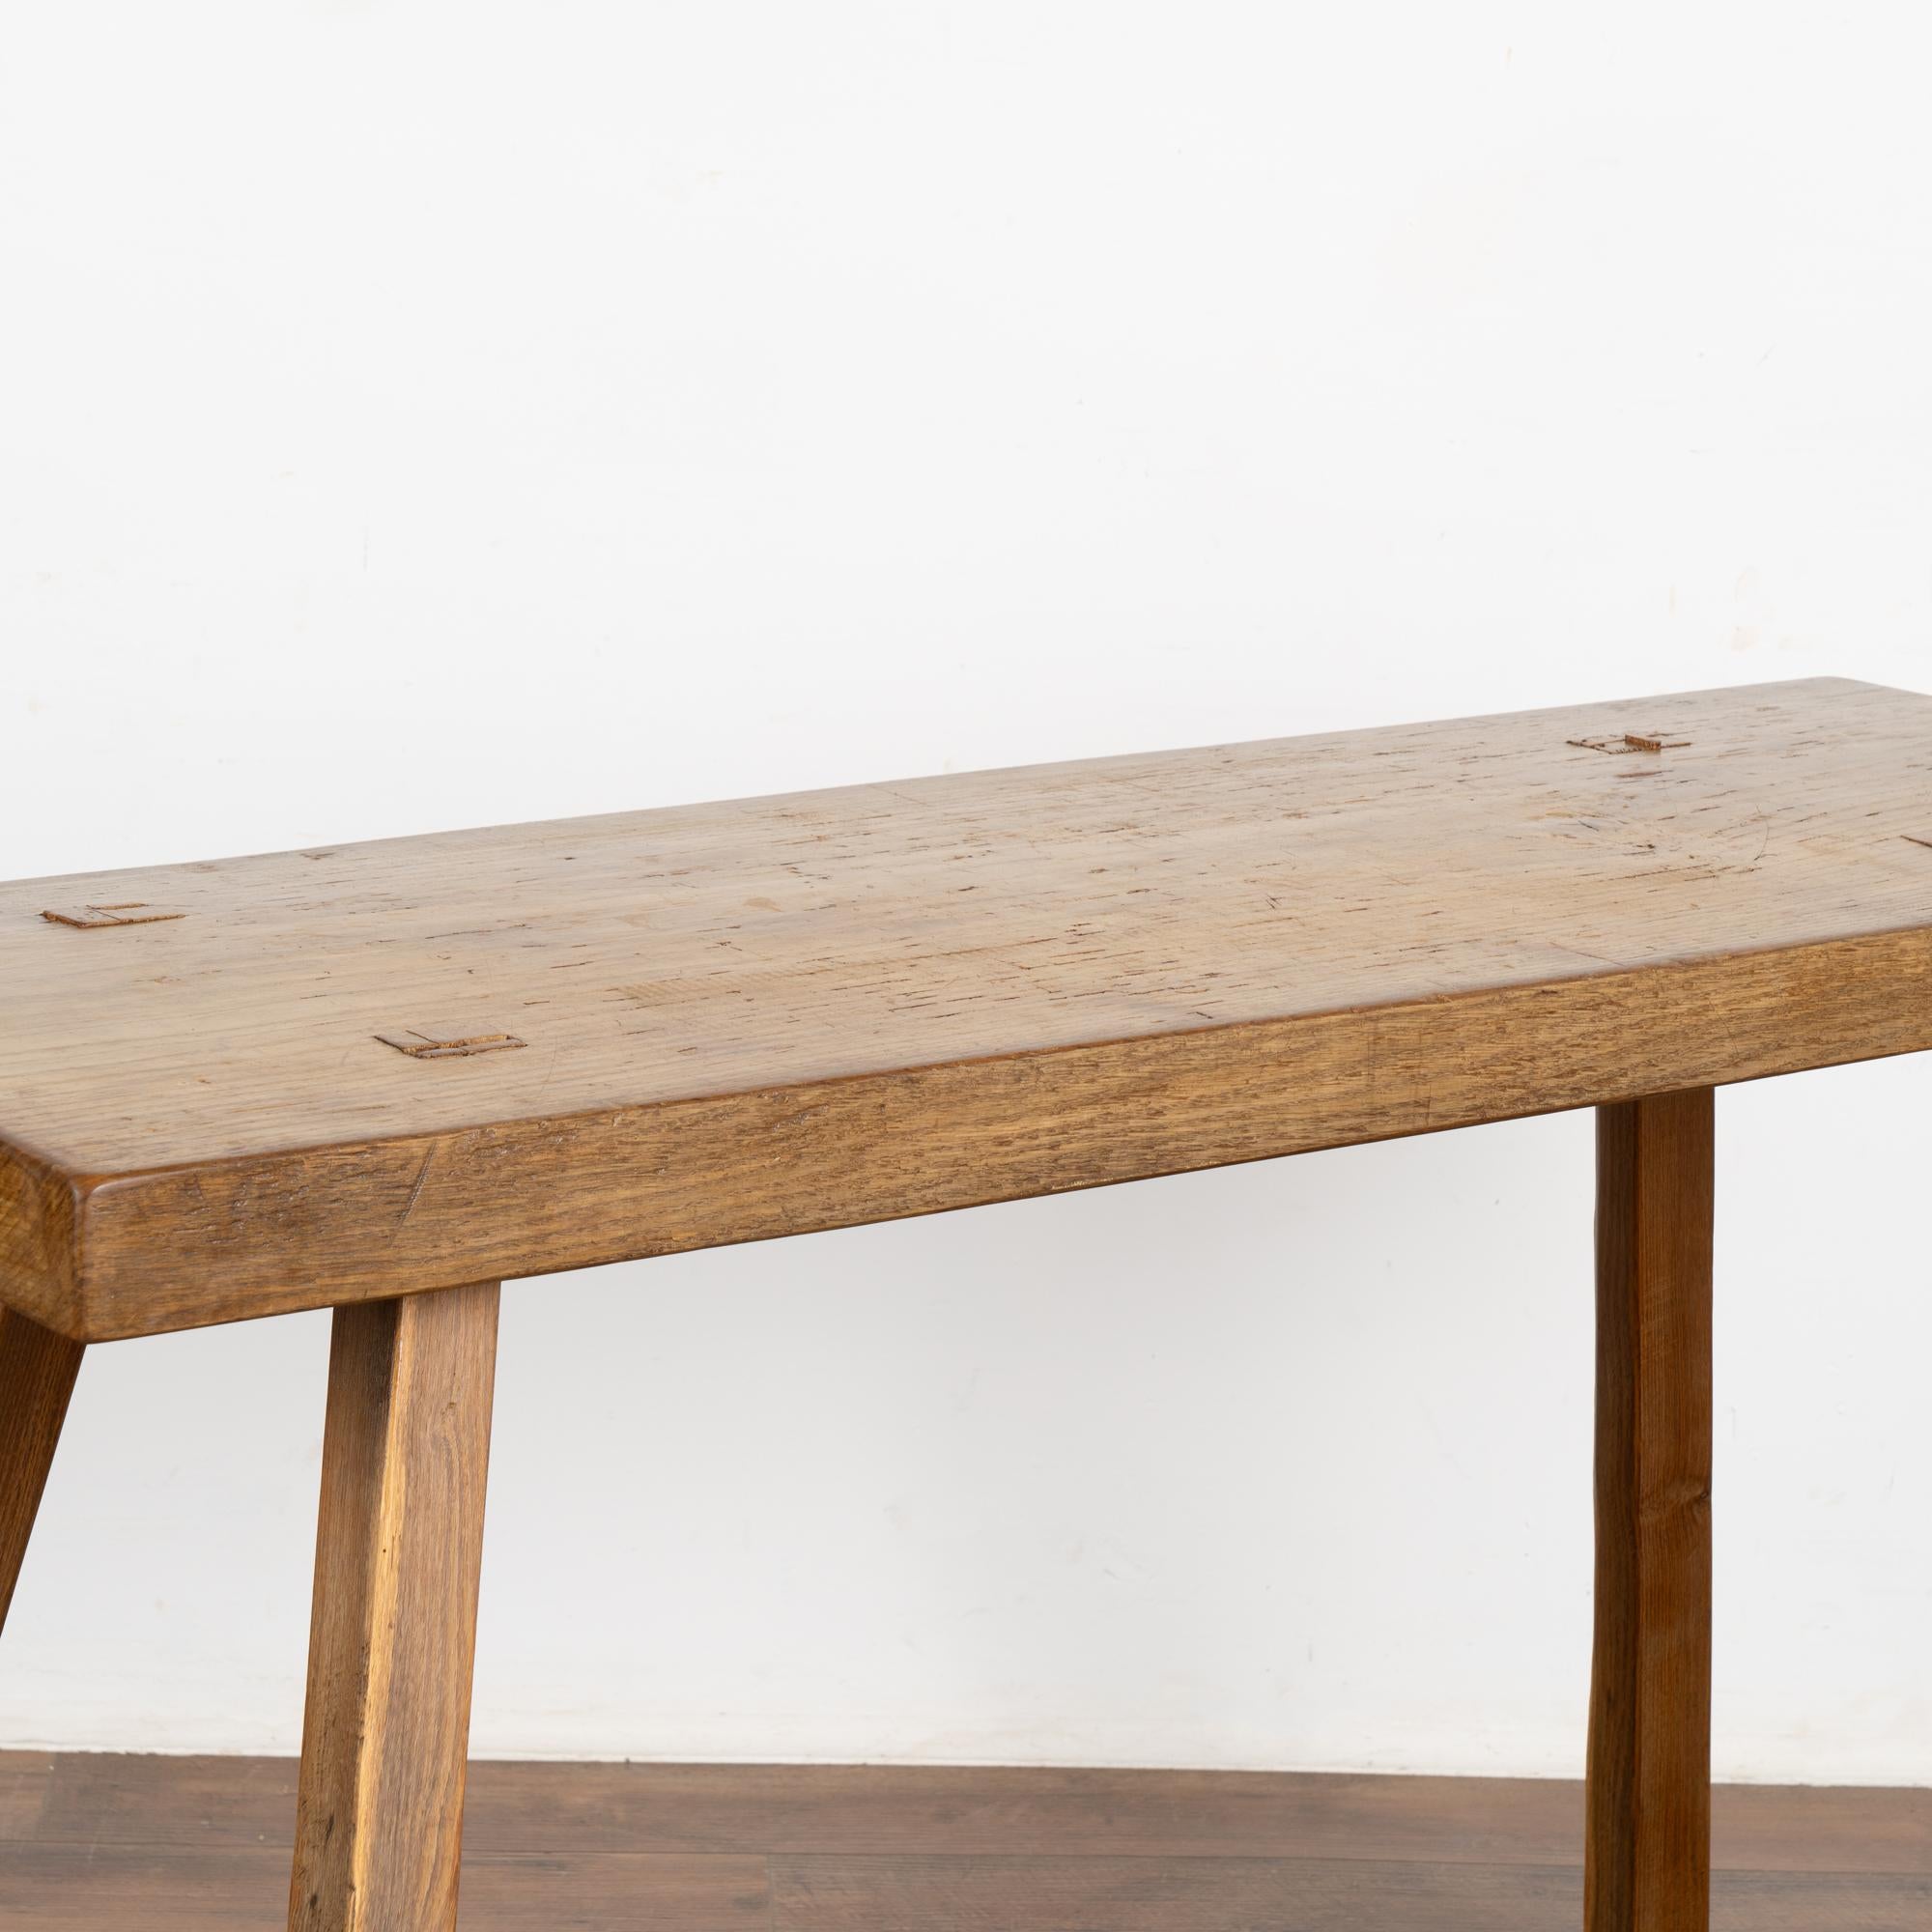 Wood Rustic Console Table With Peg Legs, Hungary circa 1890 For Sale